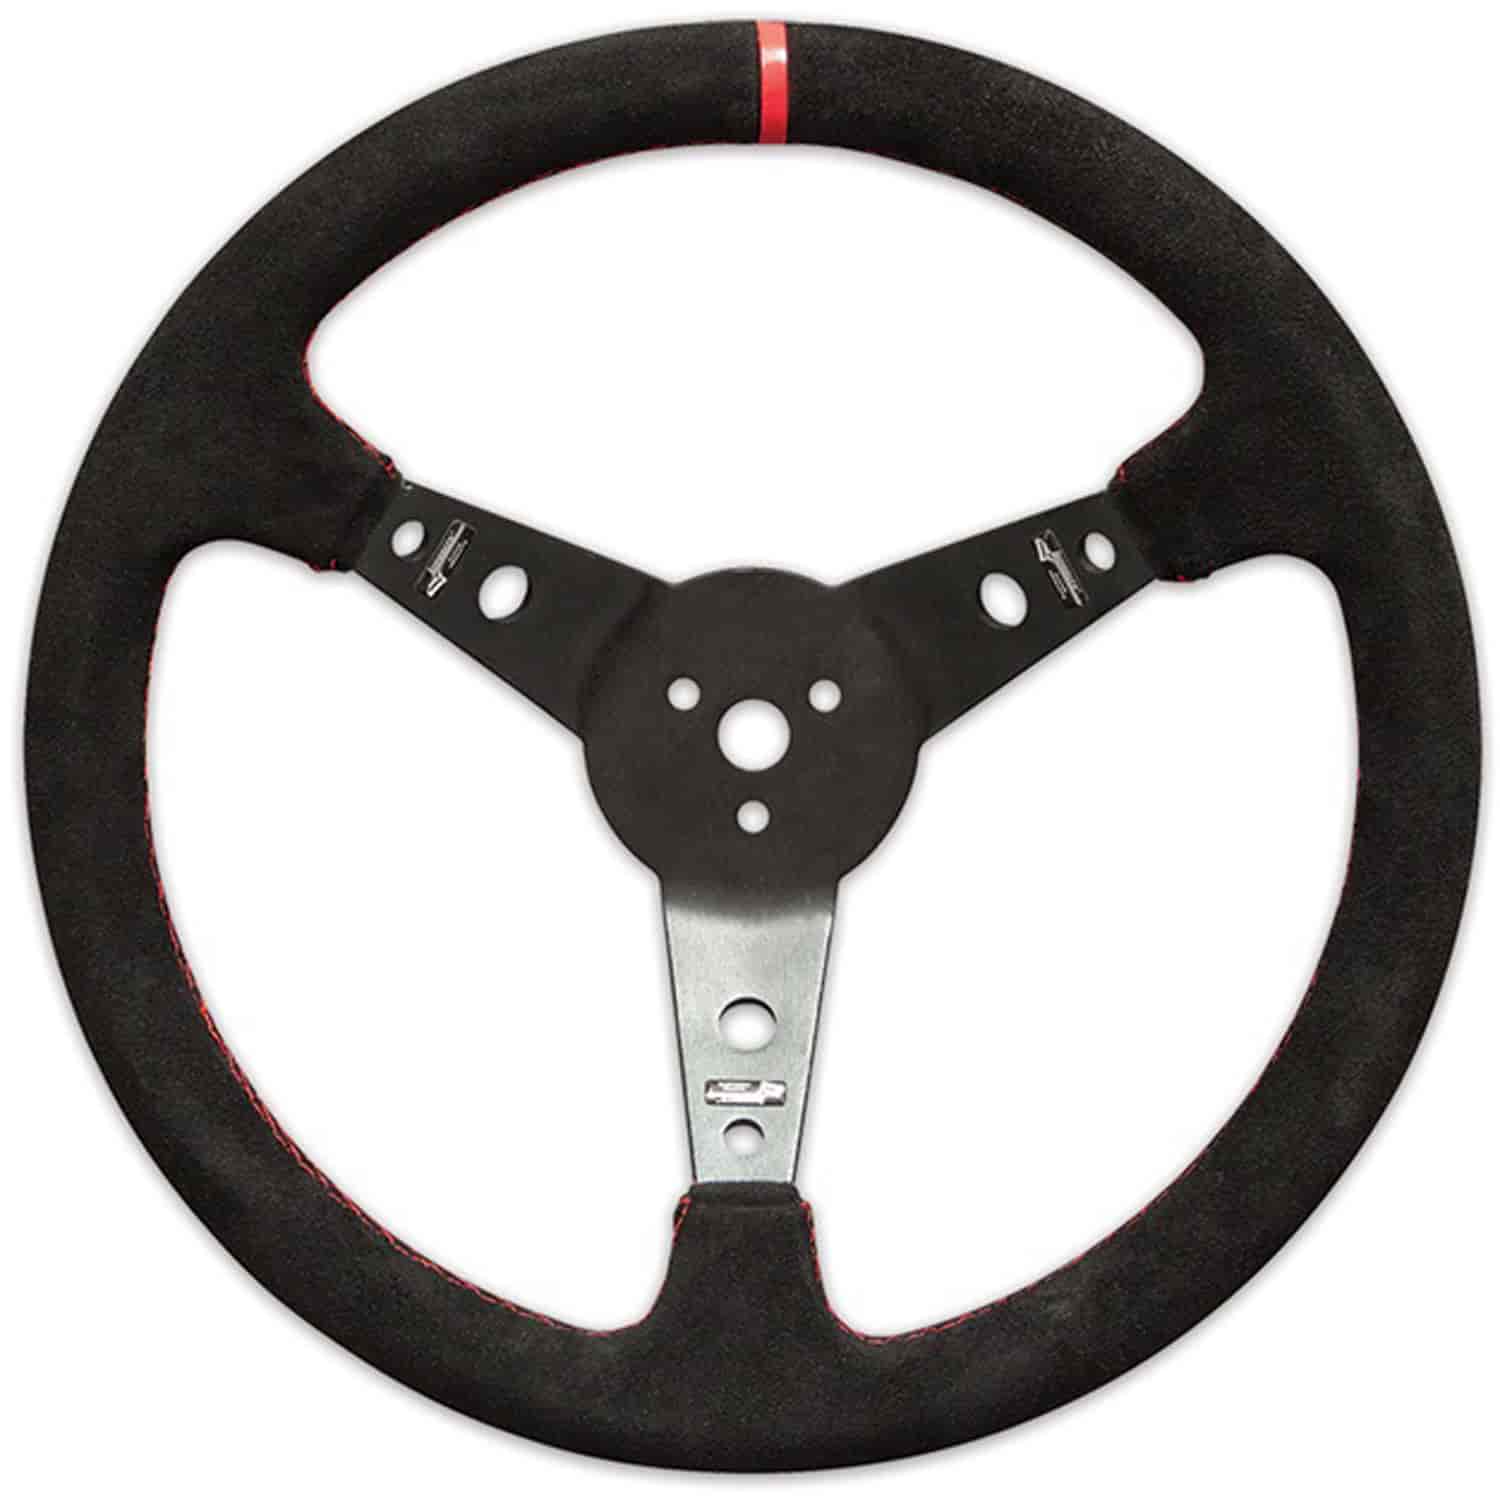 15" Aluminum Steering Wheel Black suede grip with red stitching